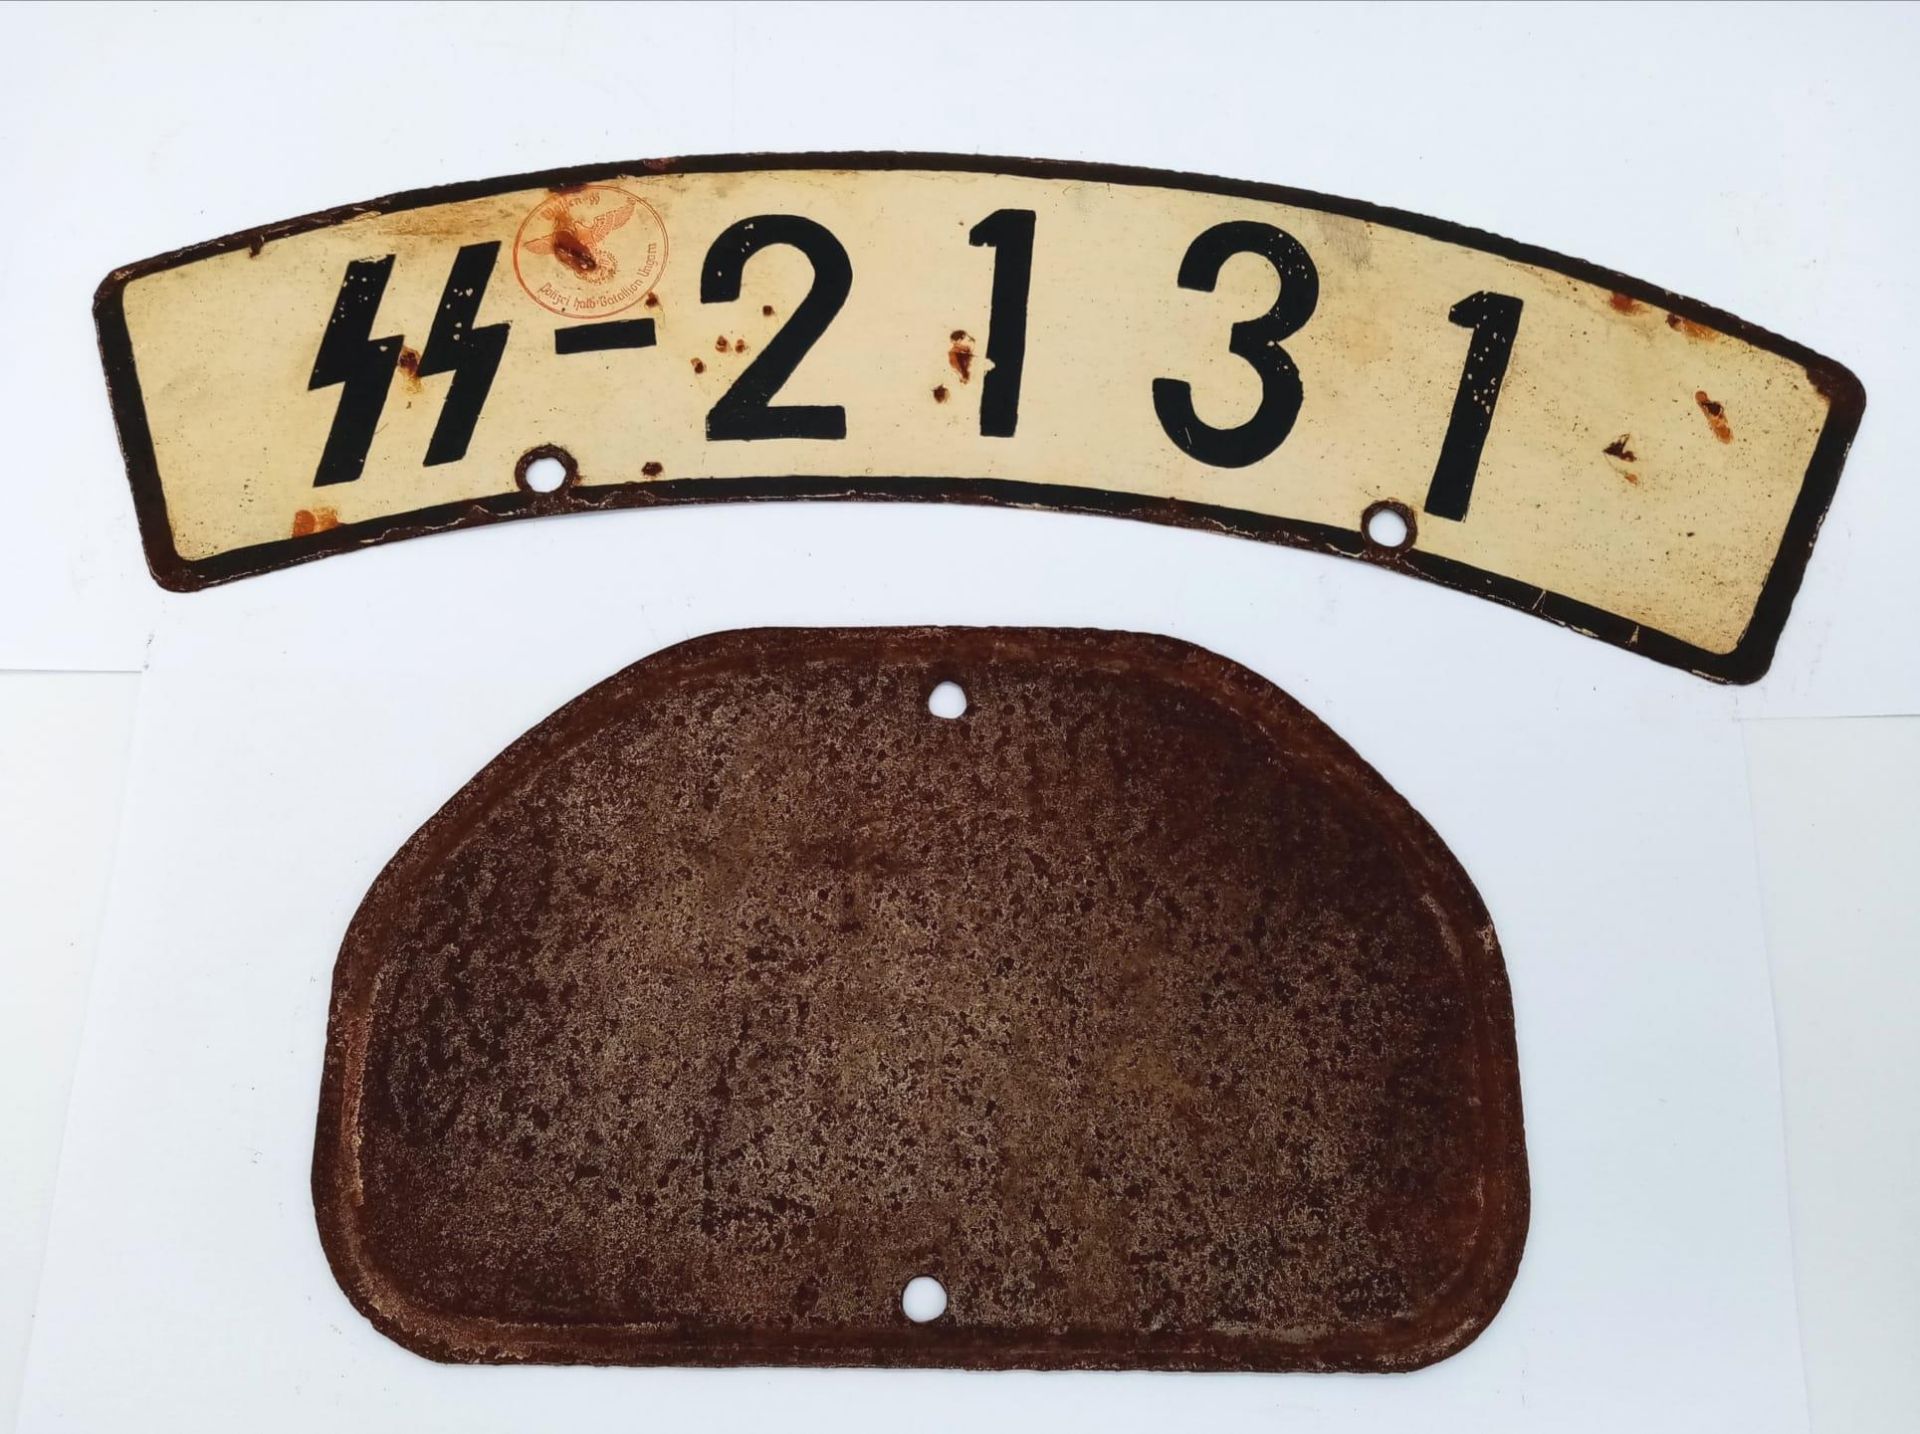 3rd Reich Waffen SS Number Plates from a motorcycle - Bild 2 aus 4